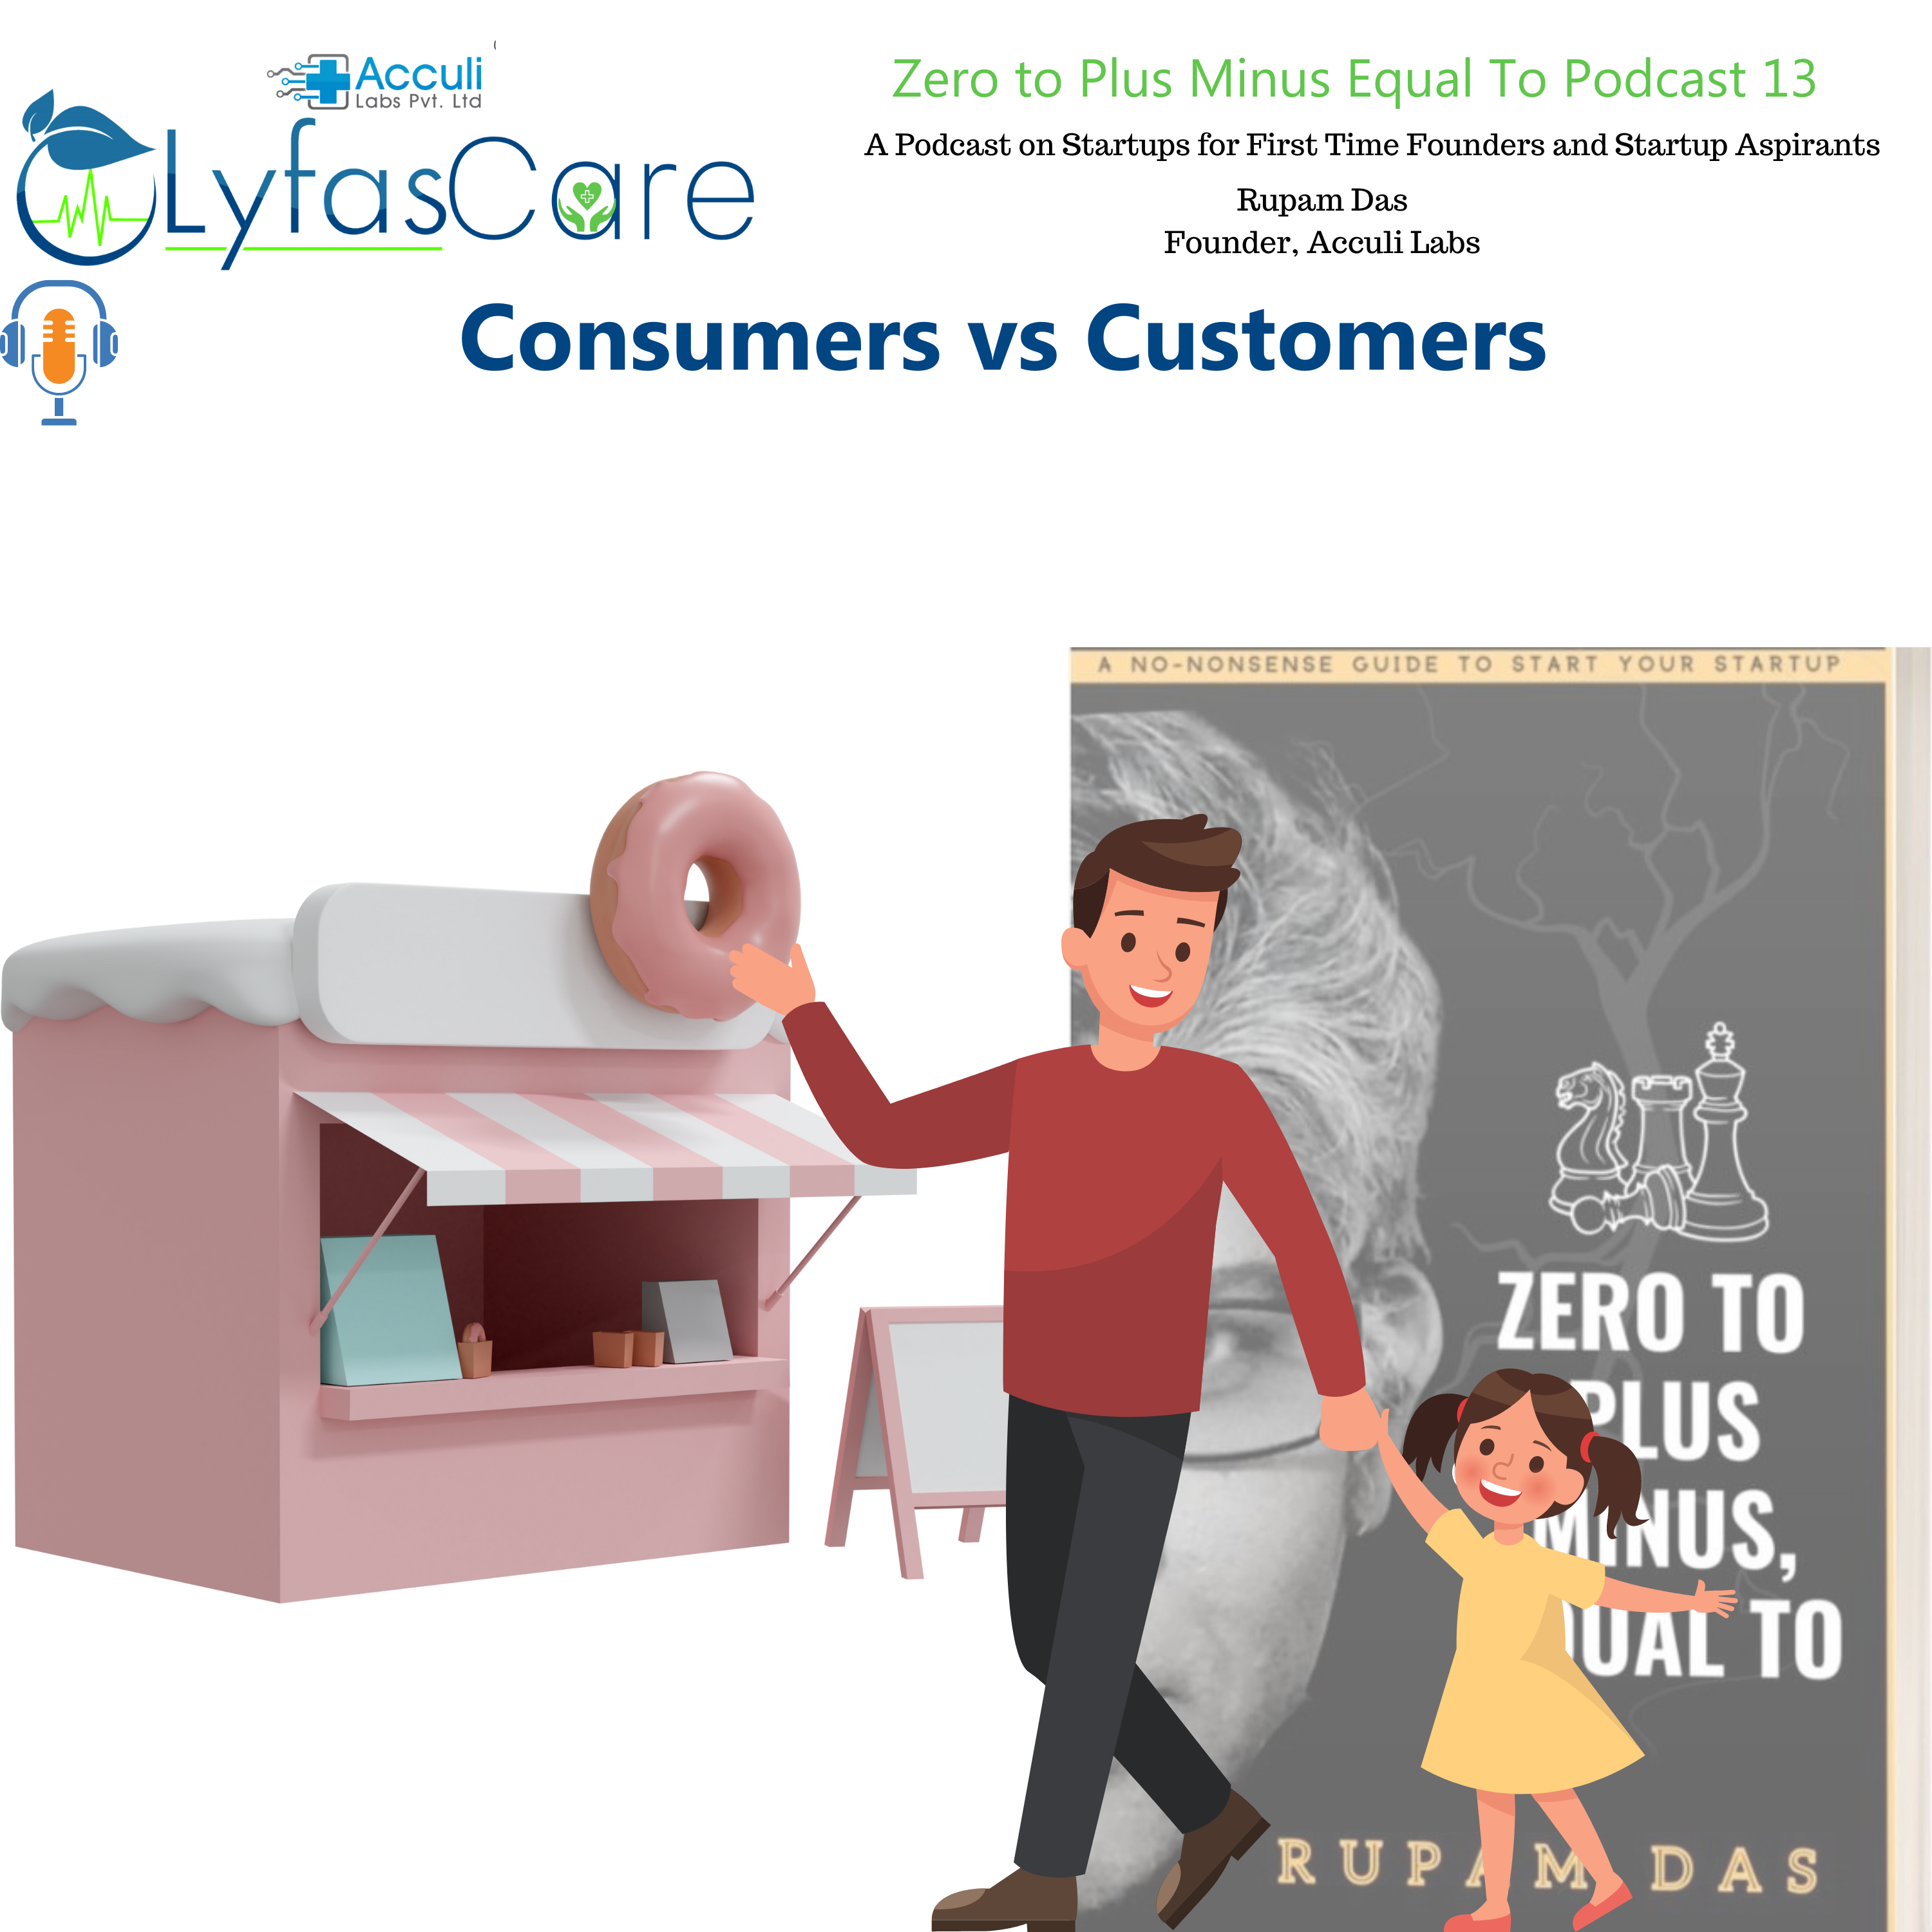 "Consumer vs Customer | Zero to Plus Minus Equal to Episode 13" from Zero to Plus Minus Equal to Startup Podcast by Rupam by Rupam Das. Released: 2022. Genre: Business, Startups, Entrepreneurship.